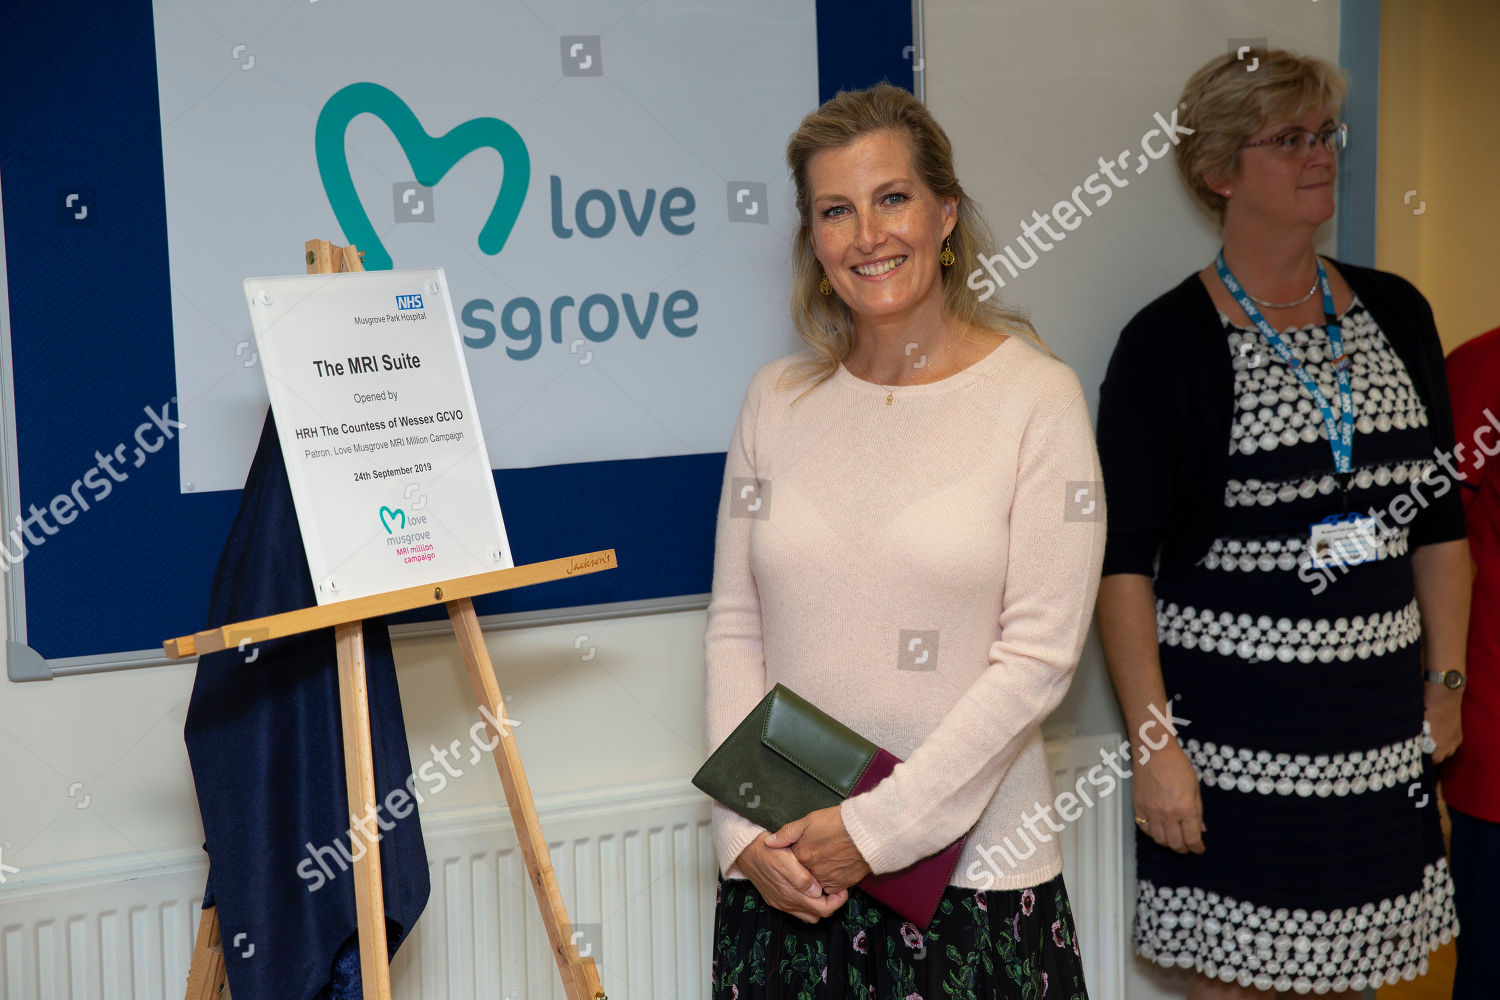 sophie-countess-of-wessex-visit-to-musgrove-park-hospital-taunton-somerset-uk-shutterstock-editorial-10422506x.jpg